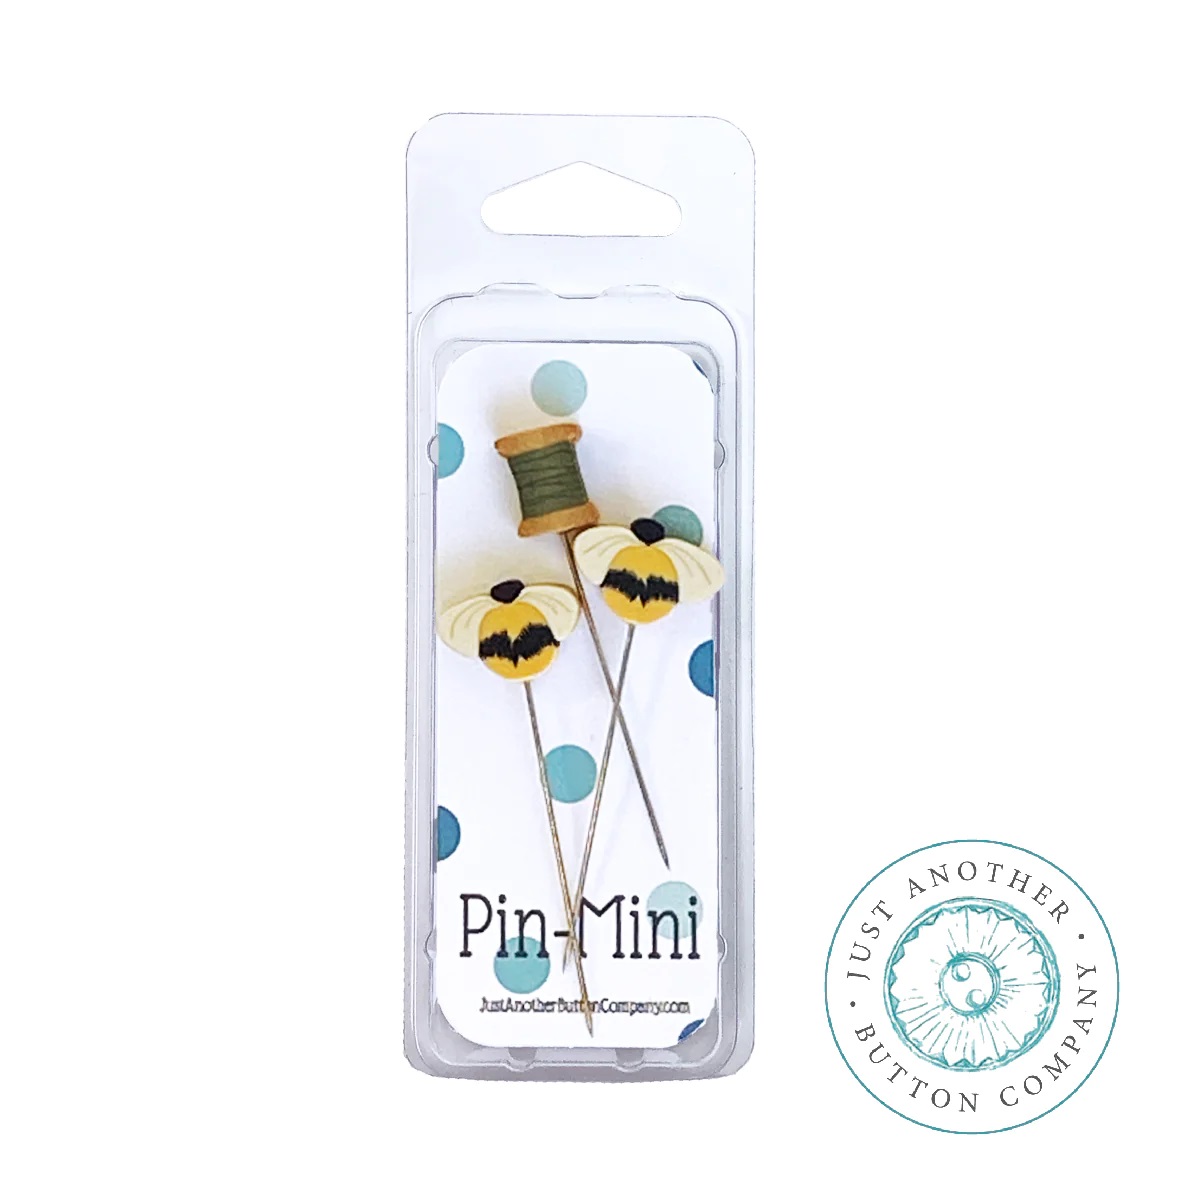 jpm551 Bee Stitching : Pin-Mini : by Just Another Button Company